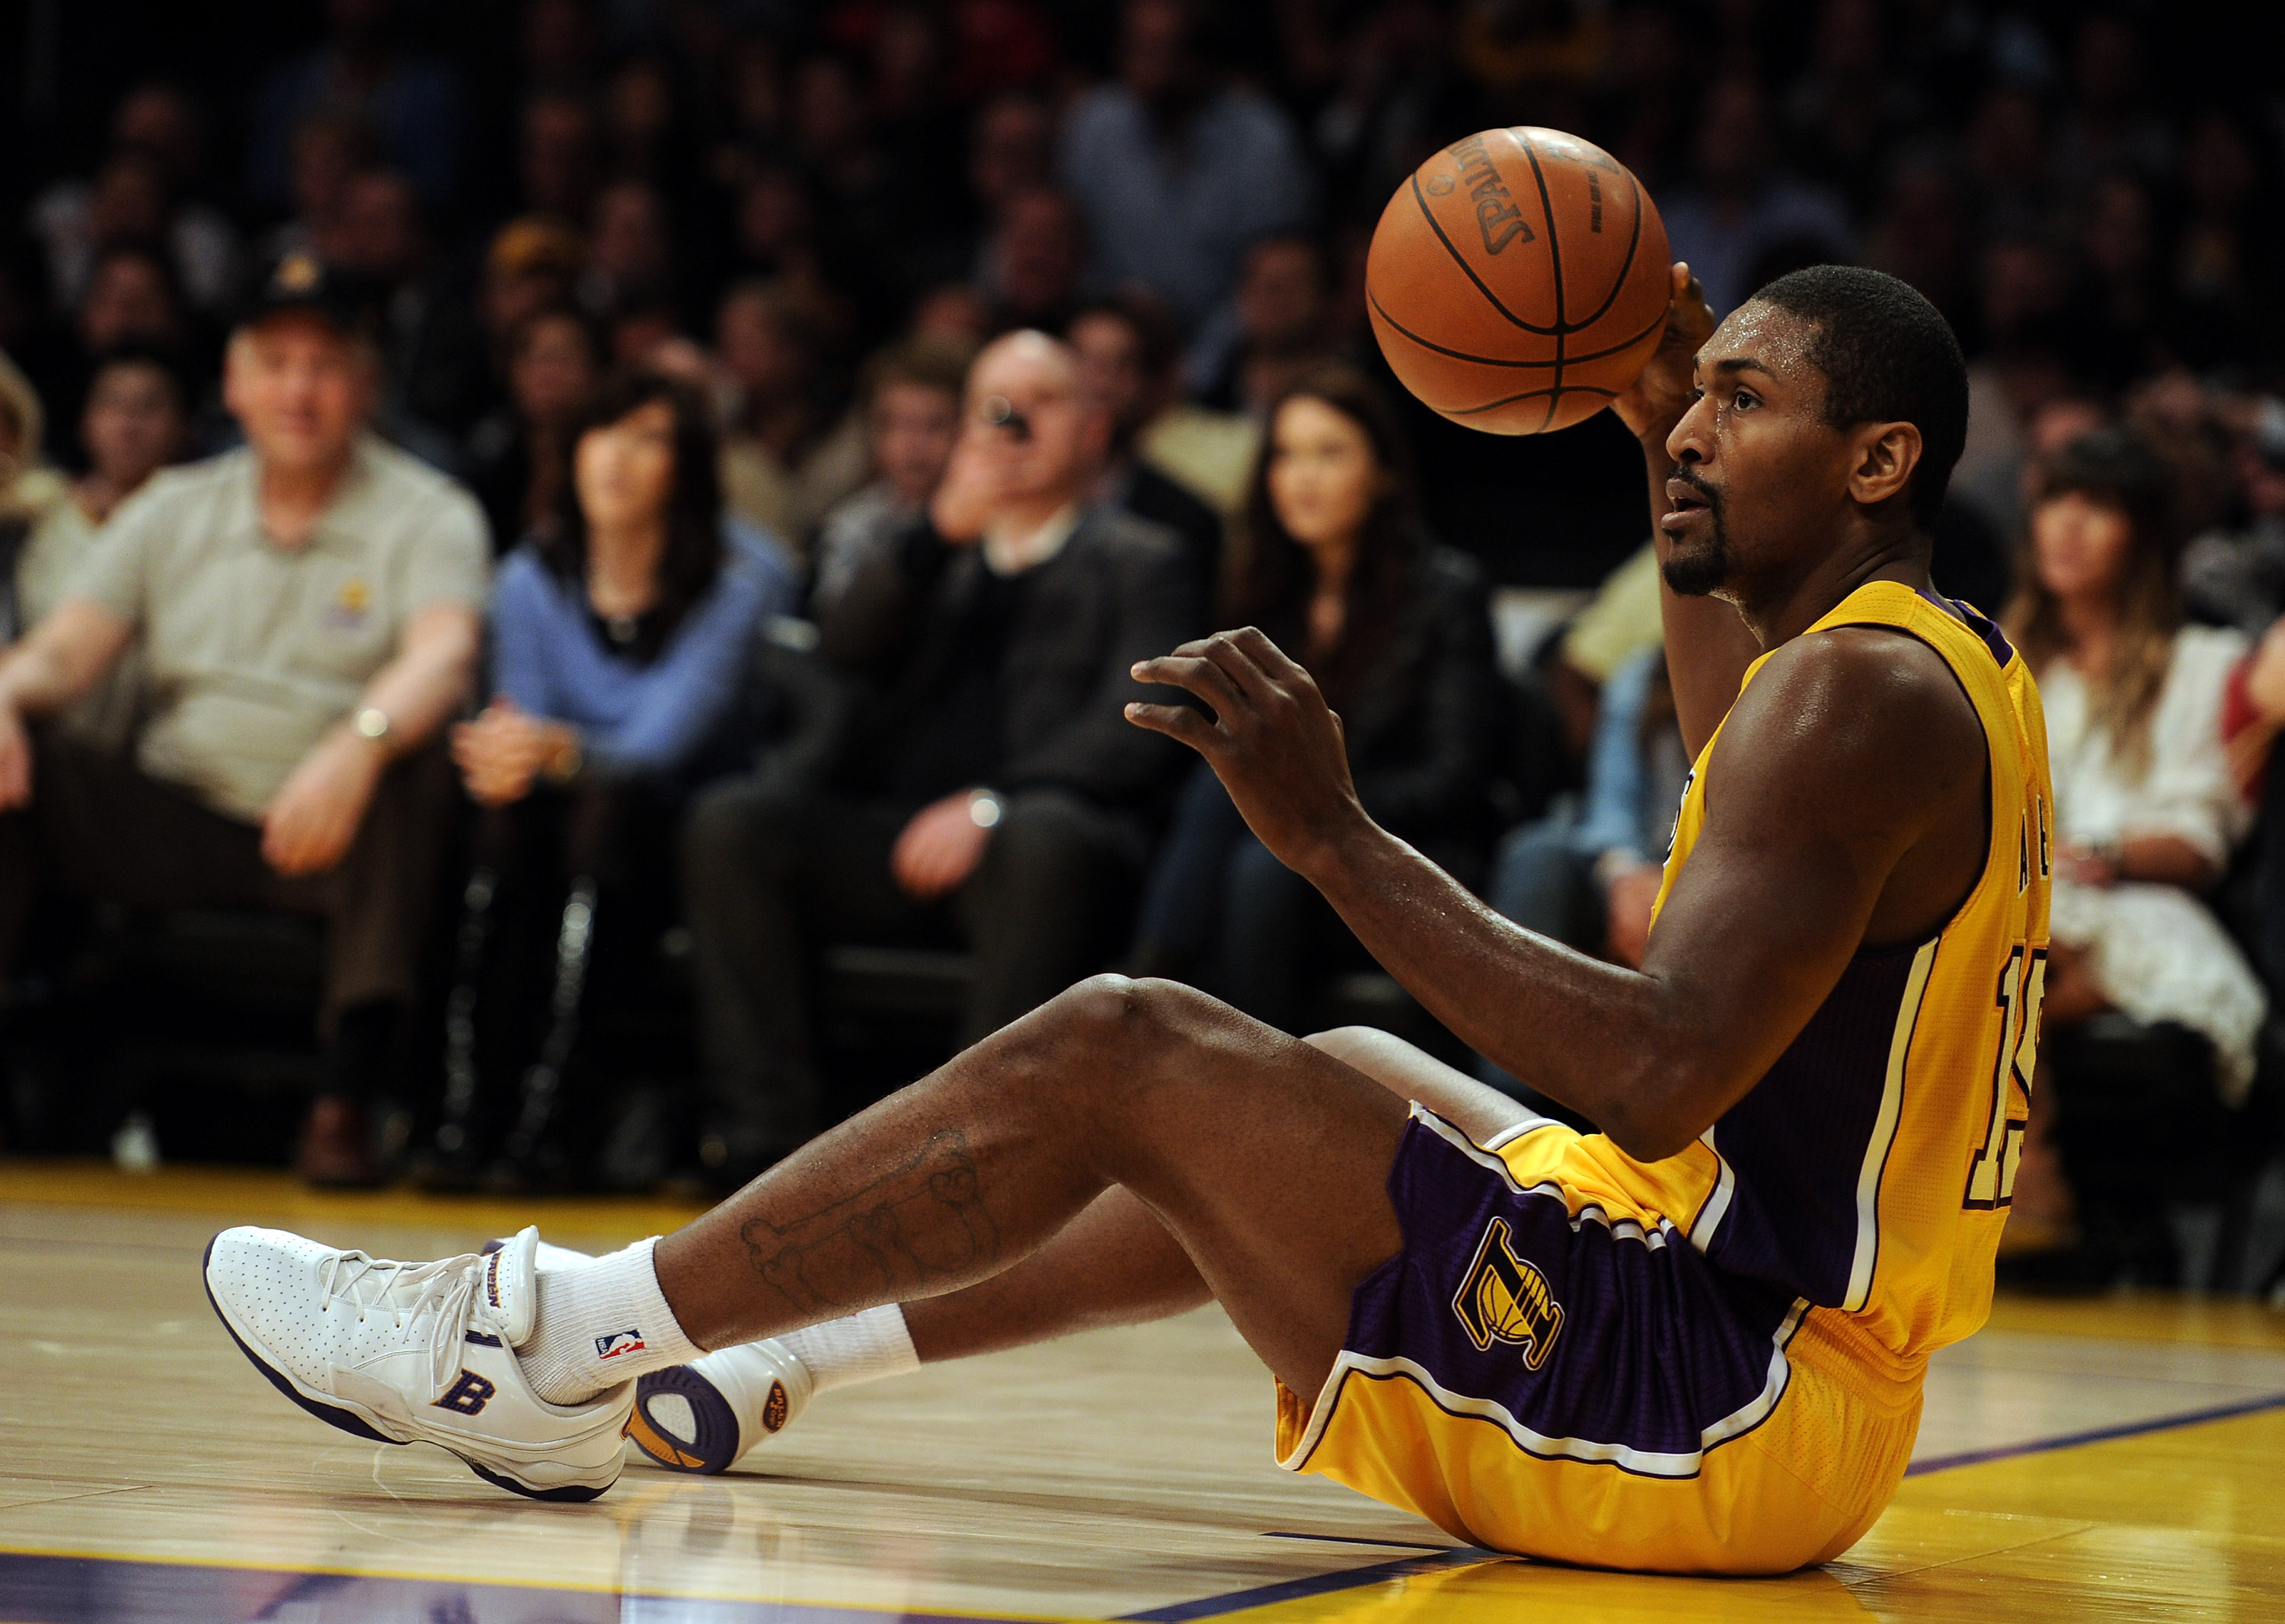 LOS ANGELES, CA - FEBRUARY 03:  Ron Artest #15 of the Los Angeles Lakers reacts to a lost possession against the San Antonio Spurs during the first half at Staples Center on February 3, 2011 in Los Angeles, California.  NOTE TO USER: User expressly acknow